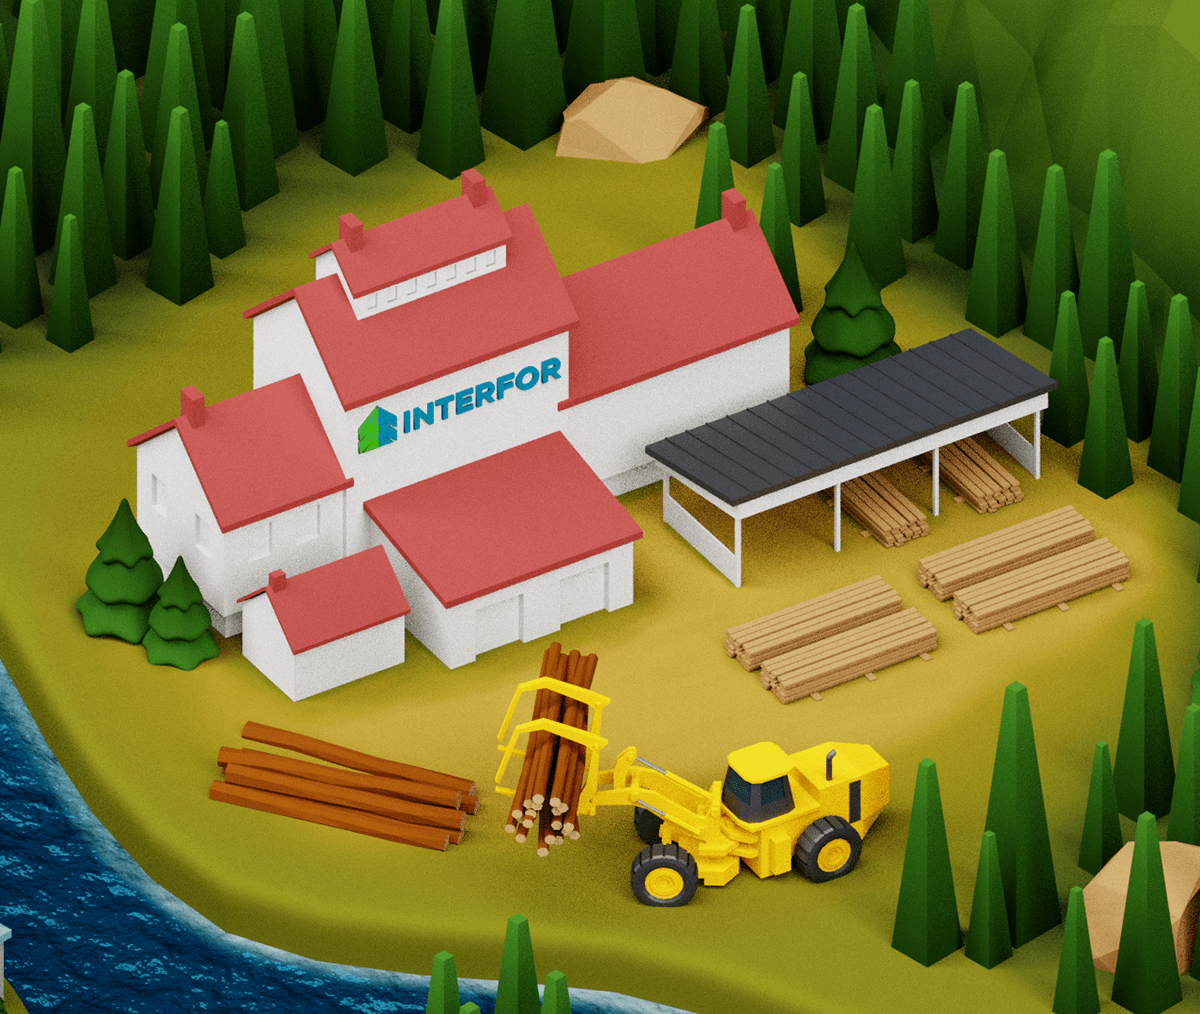 blender lowpoly west coast forestry wood industry resources 3D renewable environment